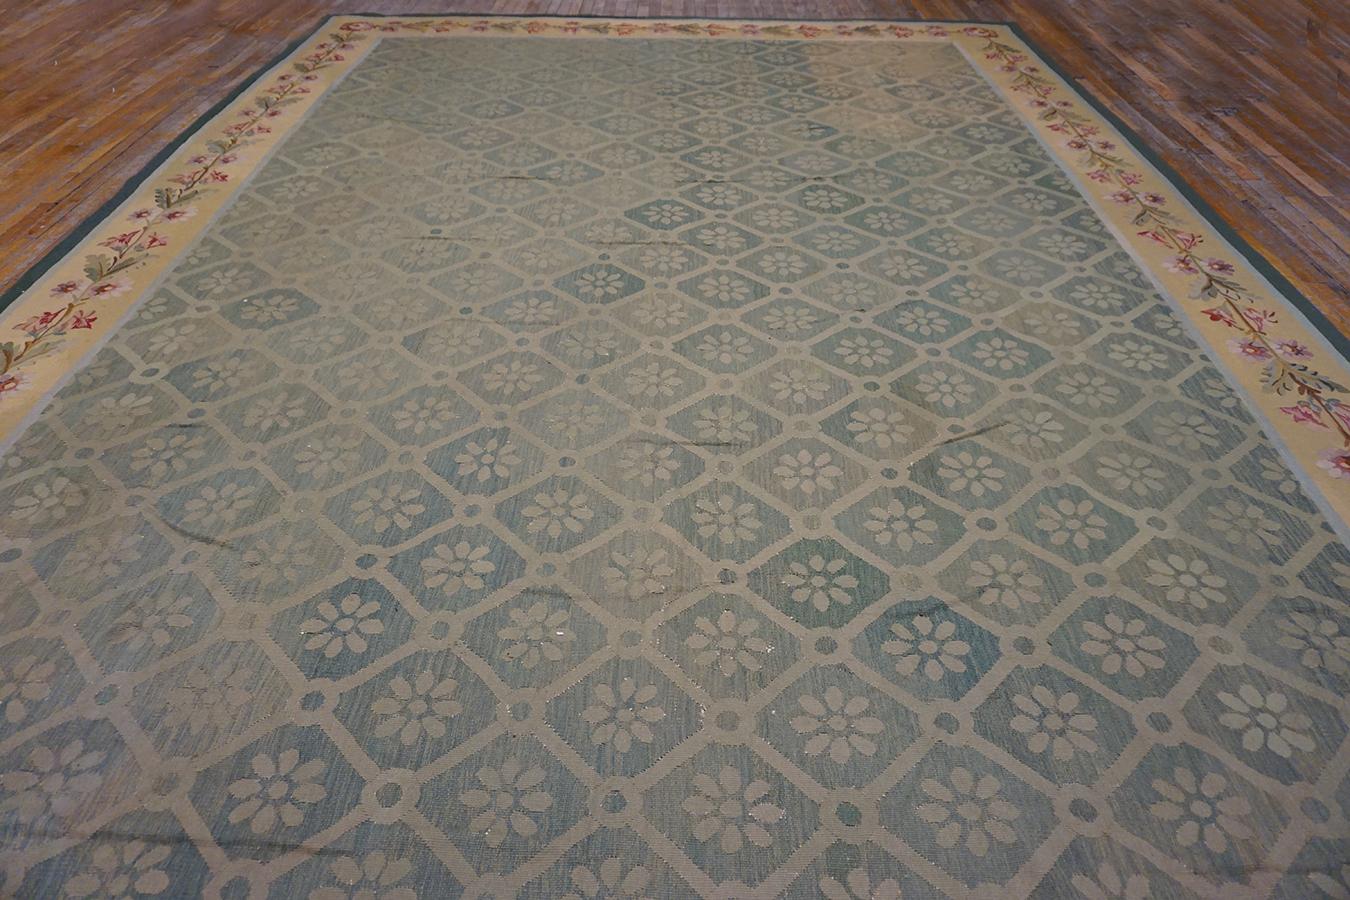 Early 20th Century 1920s French Aubusson Carpet in Empire Style ( 11'2